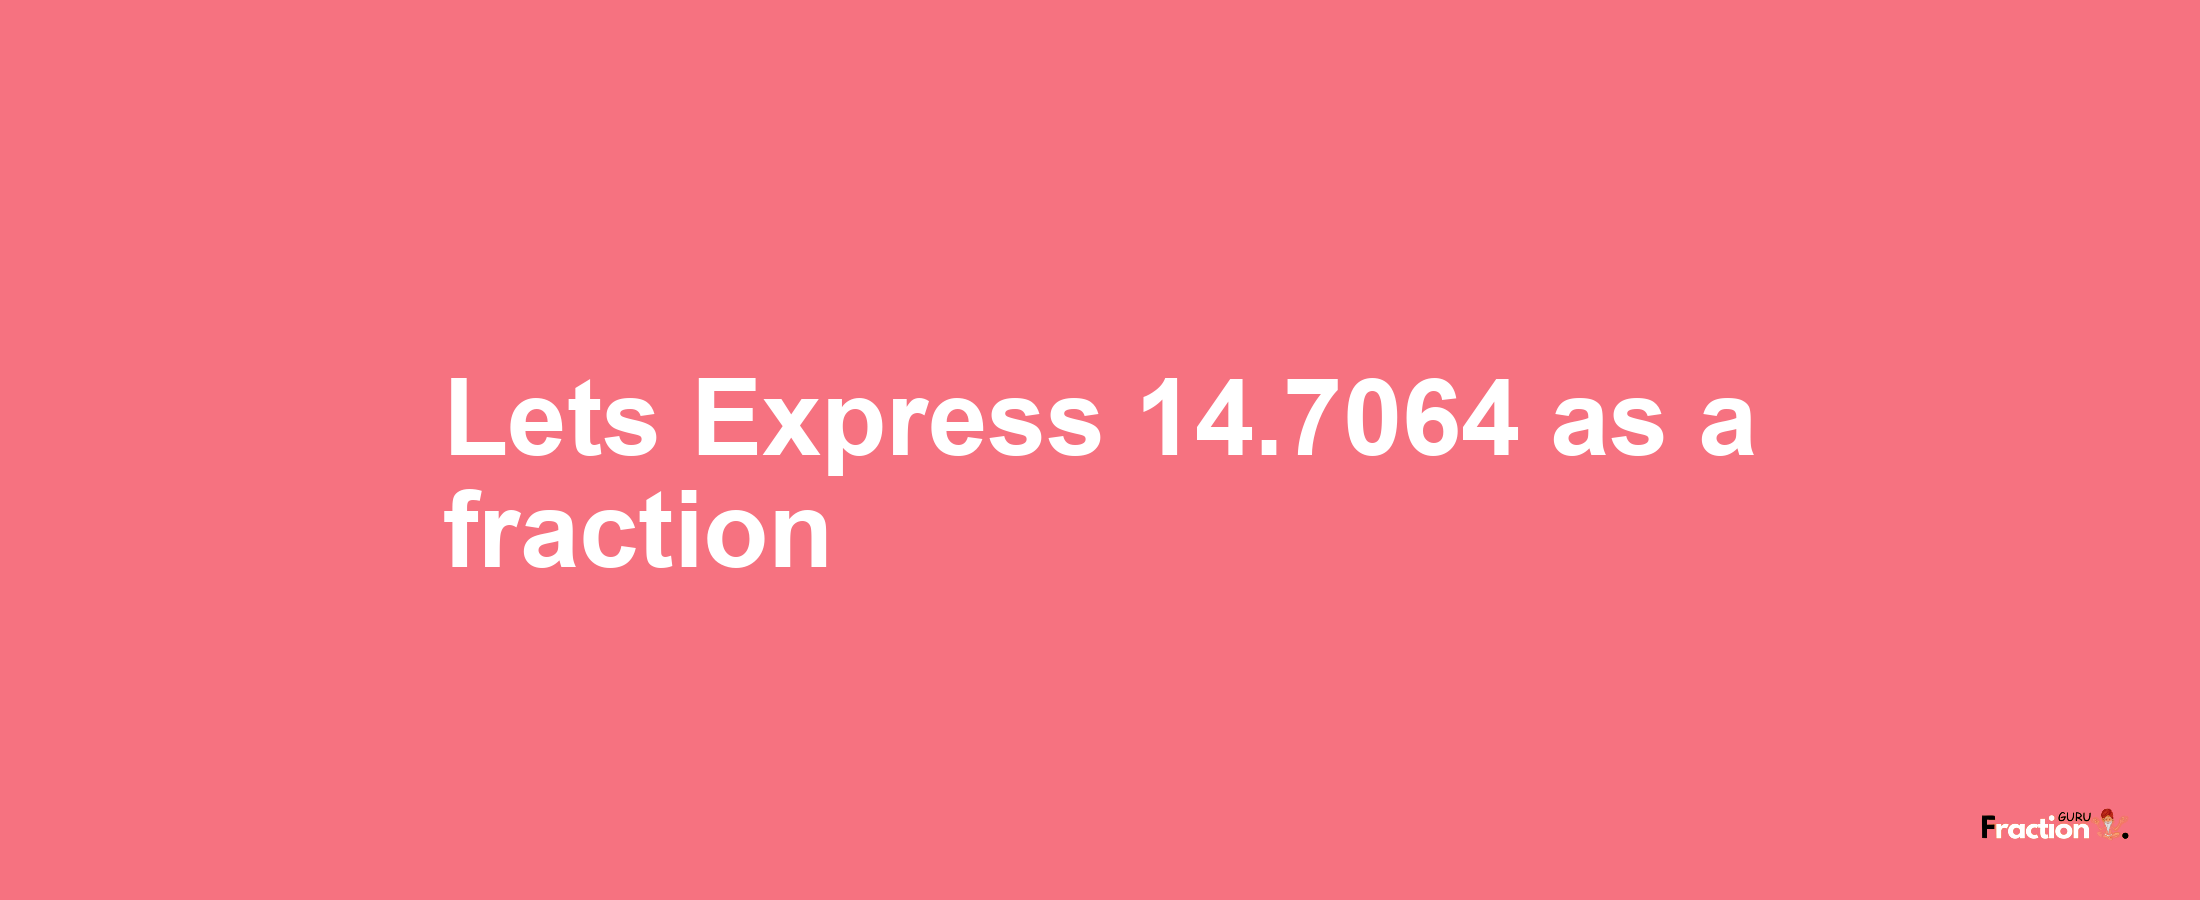 Lets Express 14.7064 as afraction